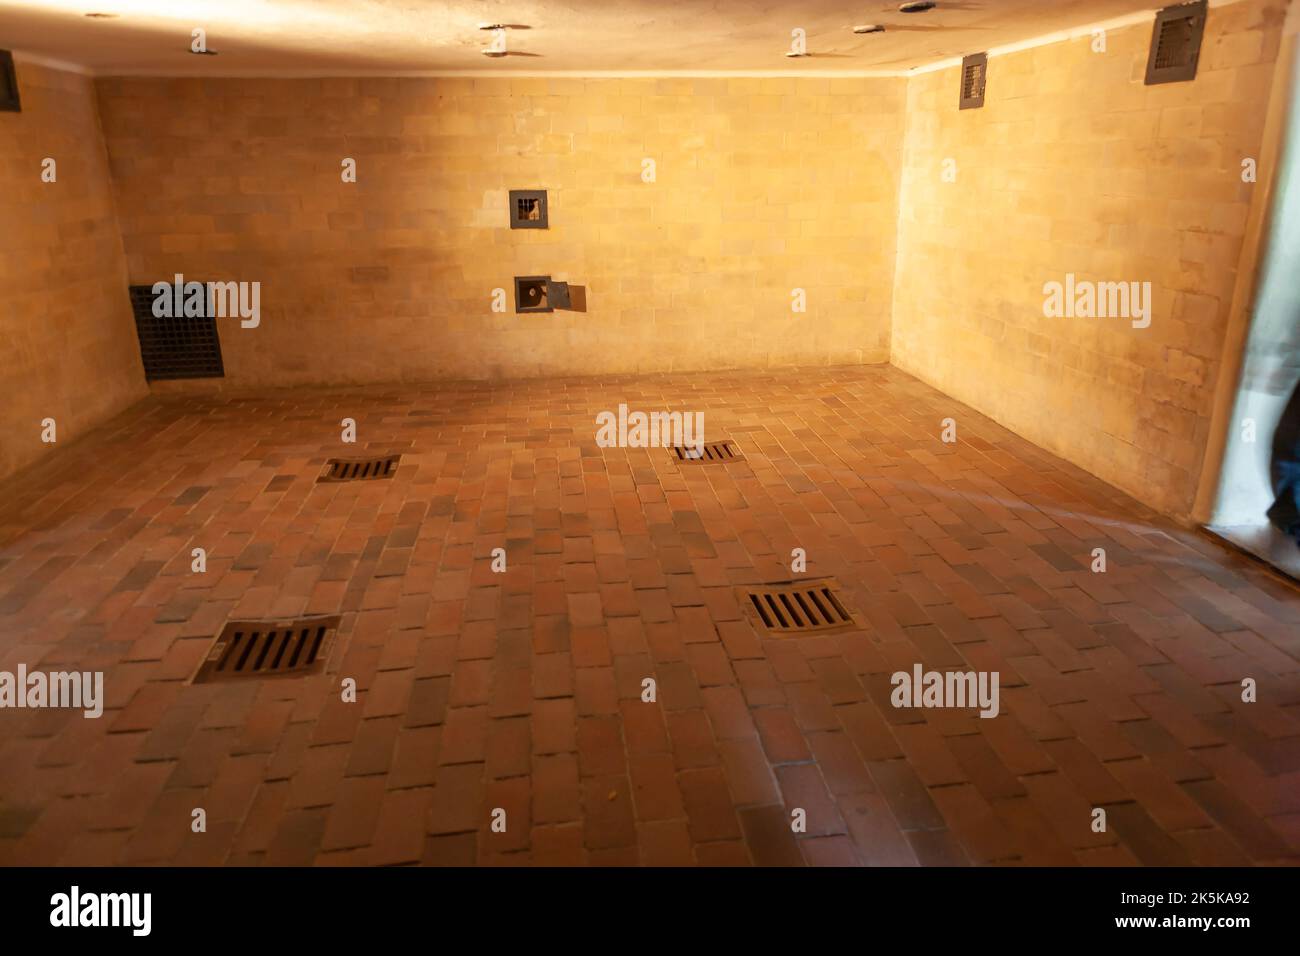 Dachau, Germany - July 4, 2011 : Dachau Concentration Camp Memorial Site. Nazi concentration camp from 1933 to 1945. Gas chamber disguised as shower r Stock Photo